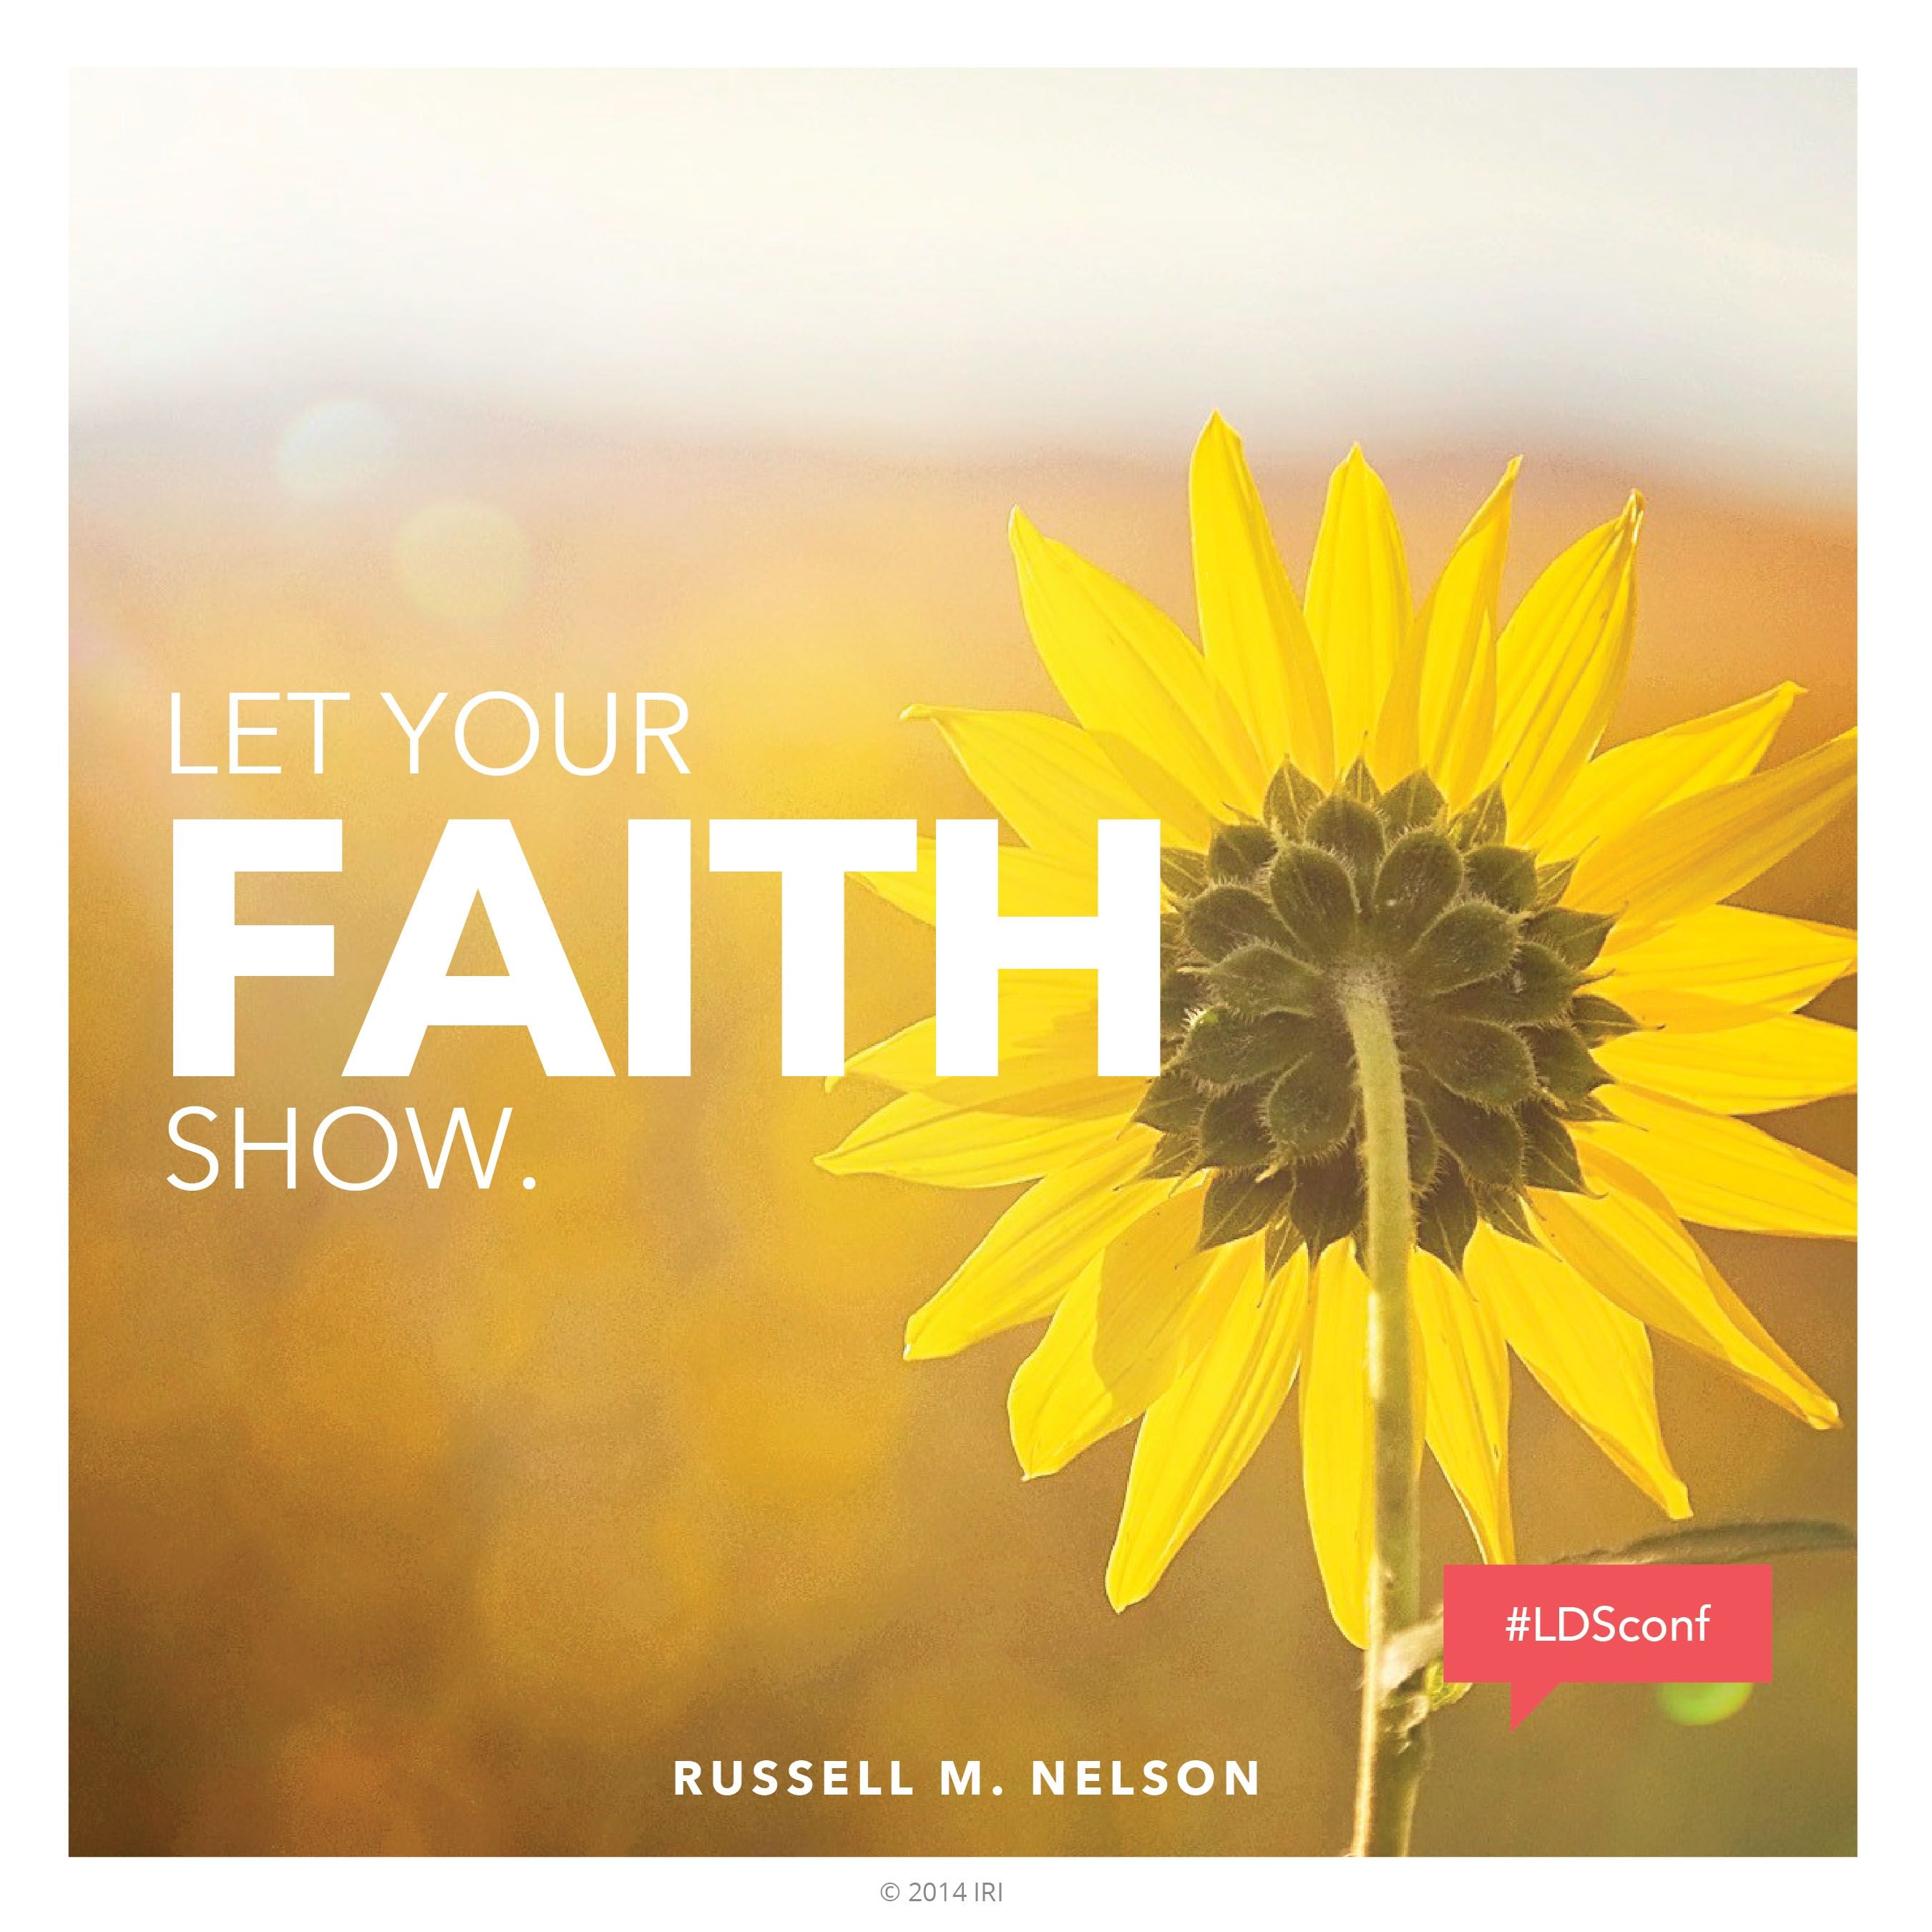 “Let your faith show.”—President Russell M. Nelson, “Let Your Faith Show” © undefined ipCode 1.